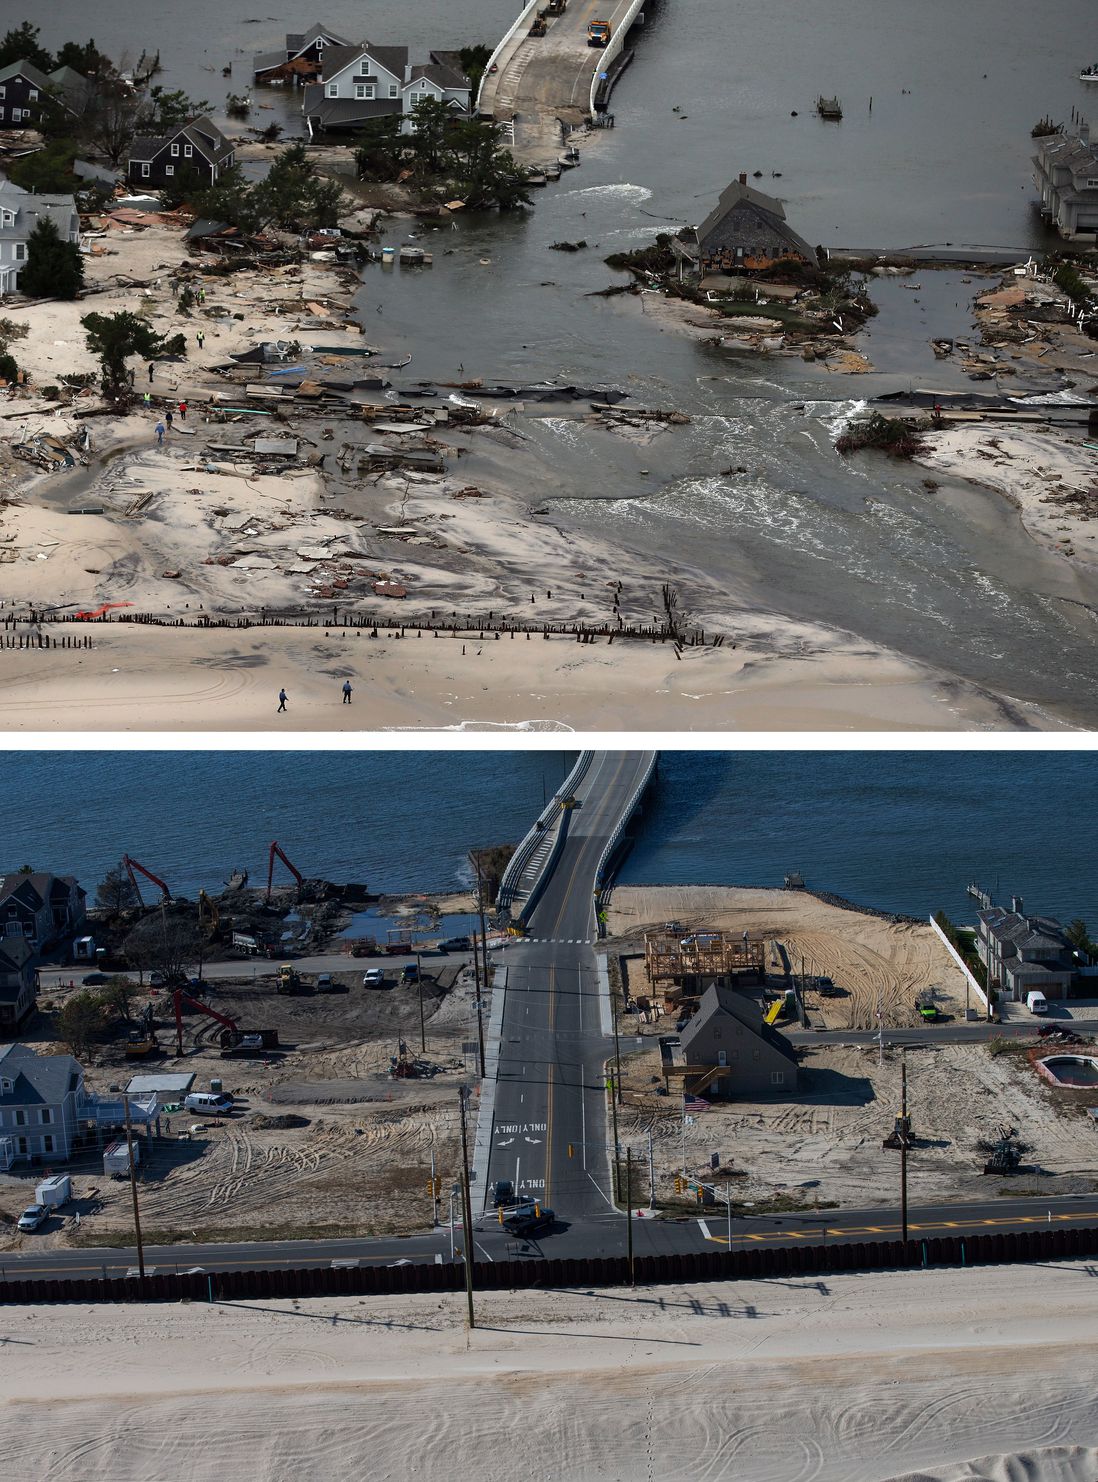 [Top] Homes built near a bridge sit destroyed due to Superstorm Sandy in Mantoloking, New Jersey October 31, 2012. [Bottom] Mantoloking, New Jersey is shown in this aerial view October 21, 2013.